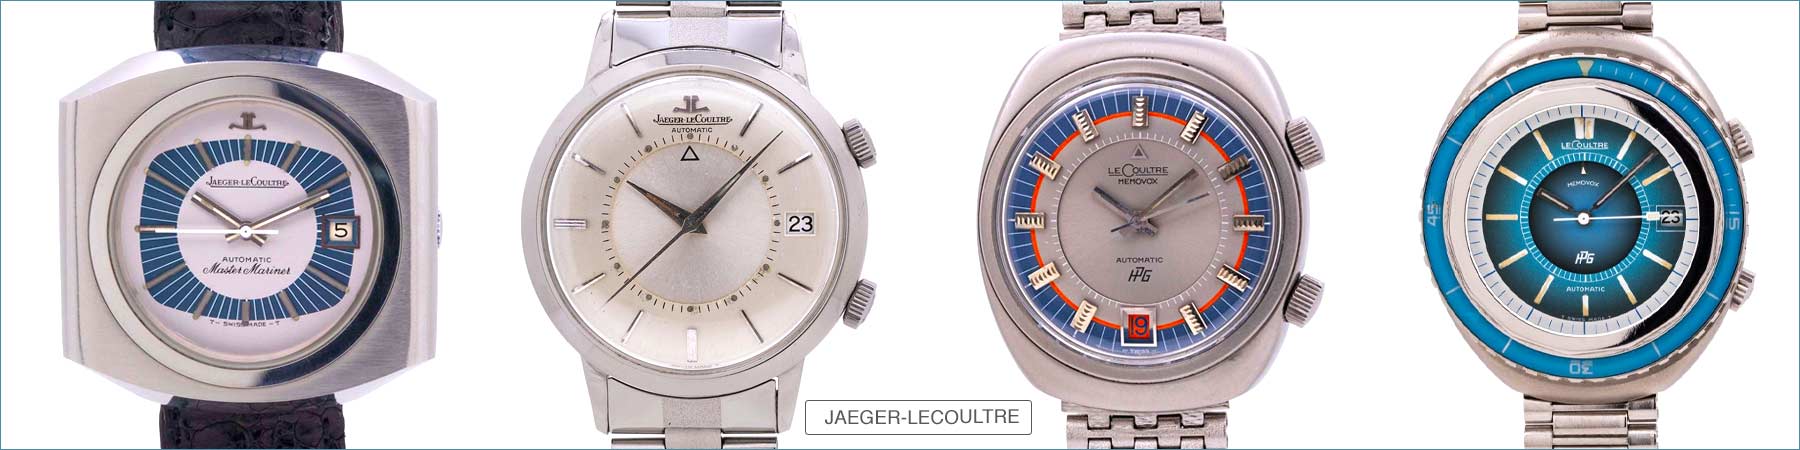 Vintage Jaeger Lecoultre, or Jaeger Lecoultre as it is referred to in Europe, is a fine Swiss brand that has seen a great revival in recent years.